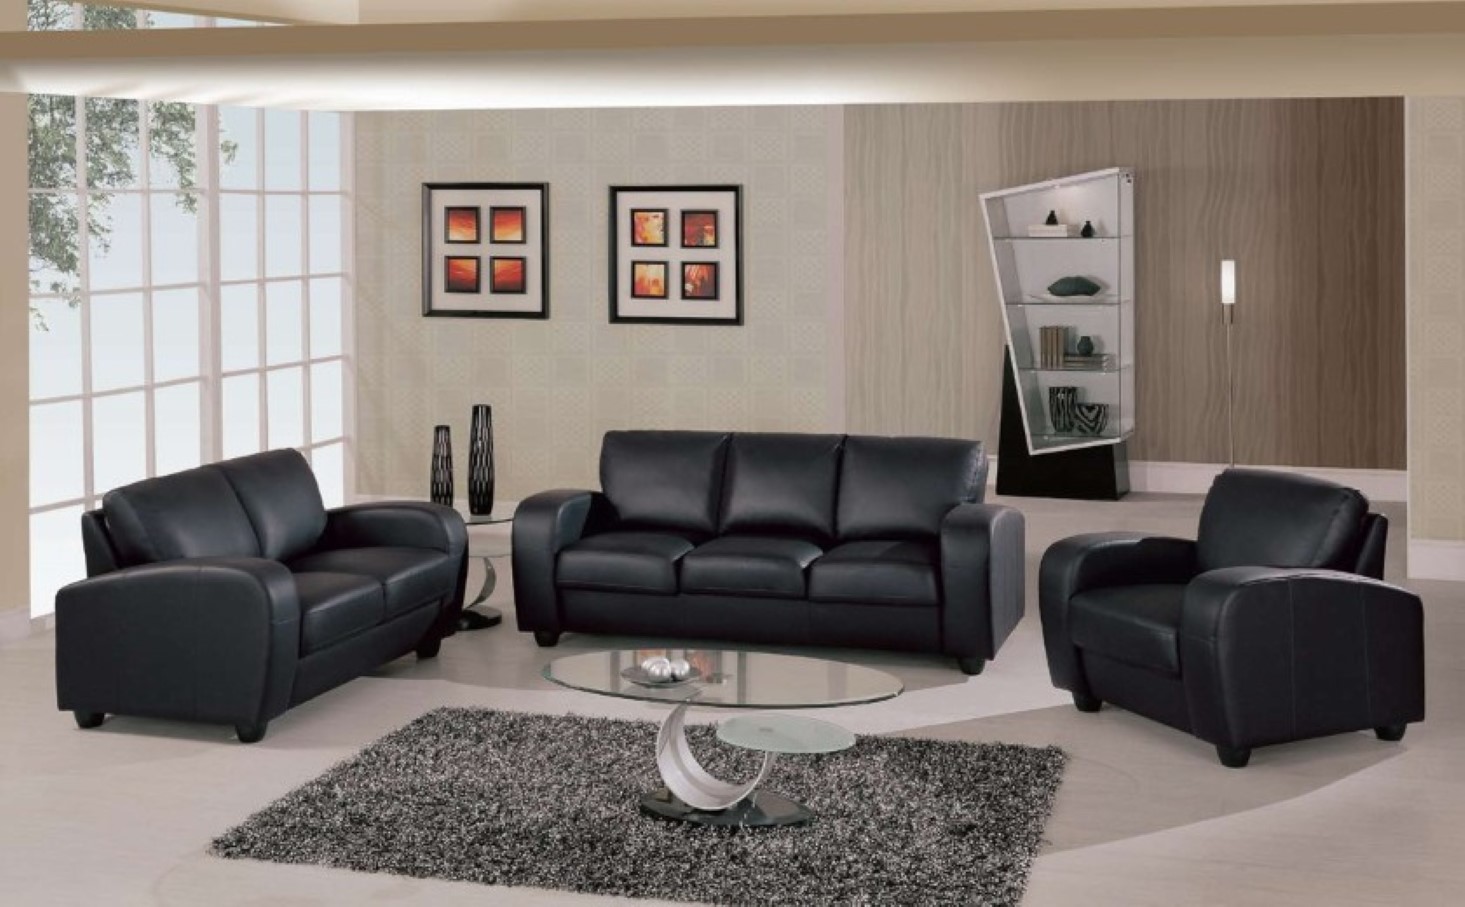 Oval Glass And Unusual Oval Glass Coffee Table And Living Room Shelf Design Plus Fabulous Black Leather Sofa Feat Fluffy Area Rug Furniture  Choosing Black Leather Sofas For Striking Living Room Feature 